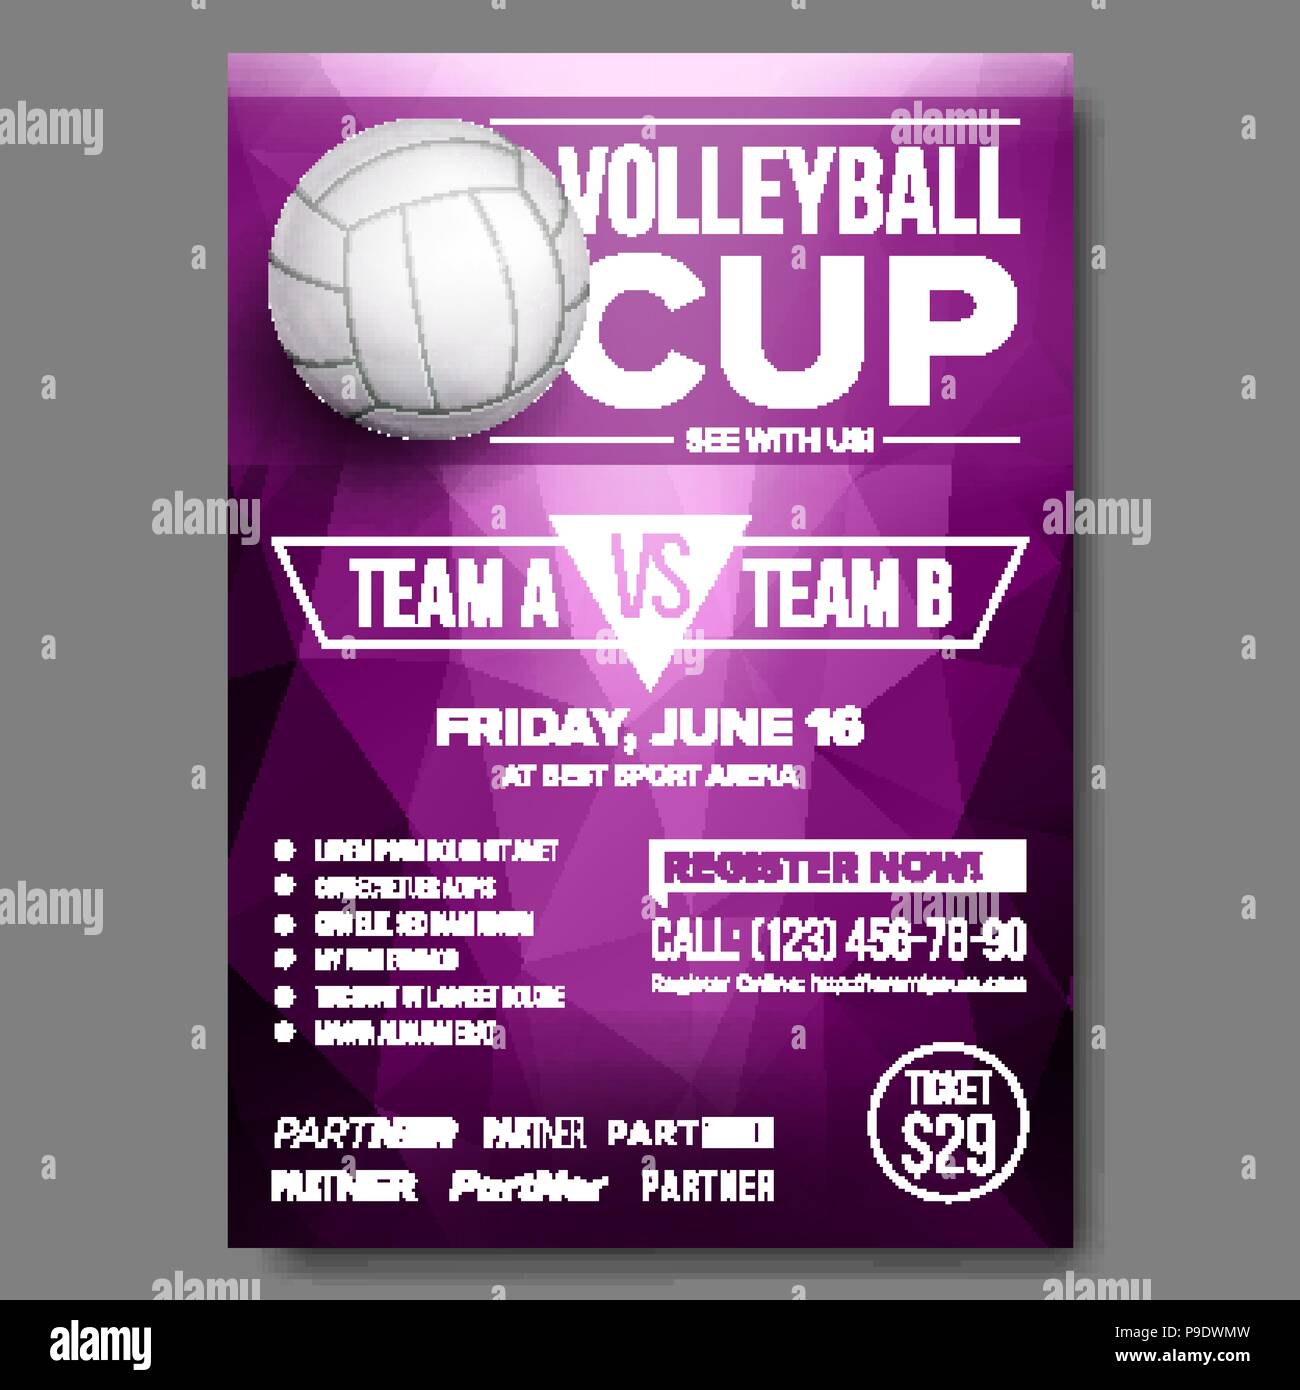 Volleyball Poster Vector. Design For Sport Cafe, Pub, Bar Promotion ...